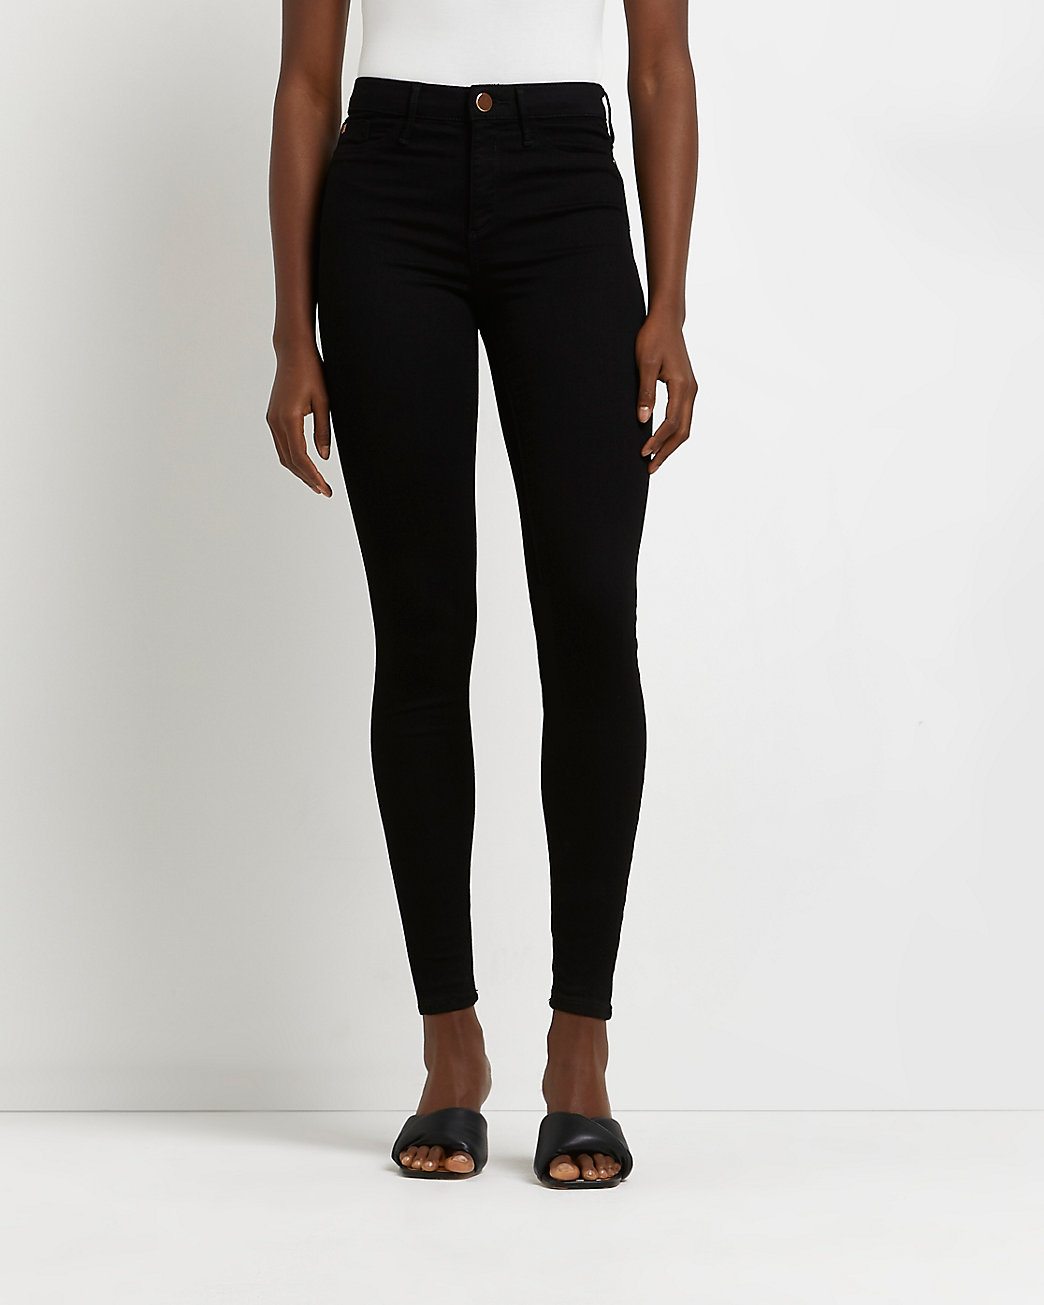 Black Molly mid rise skinny jeans